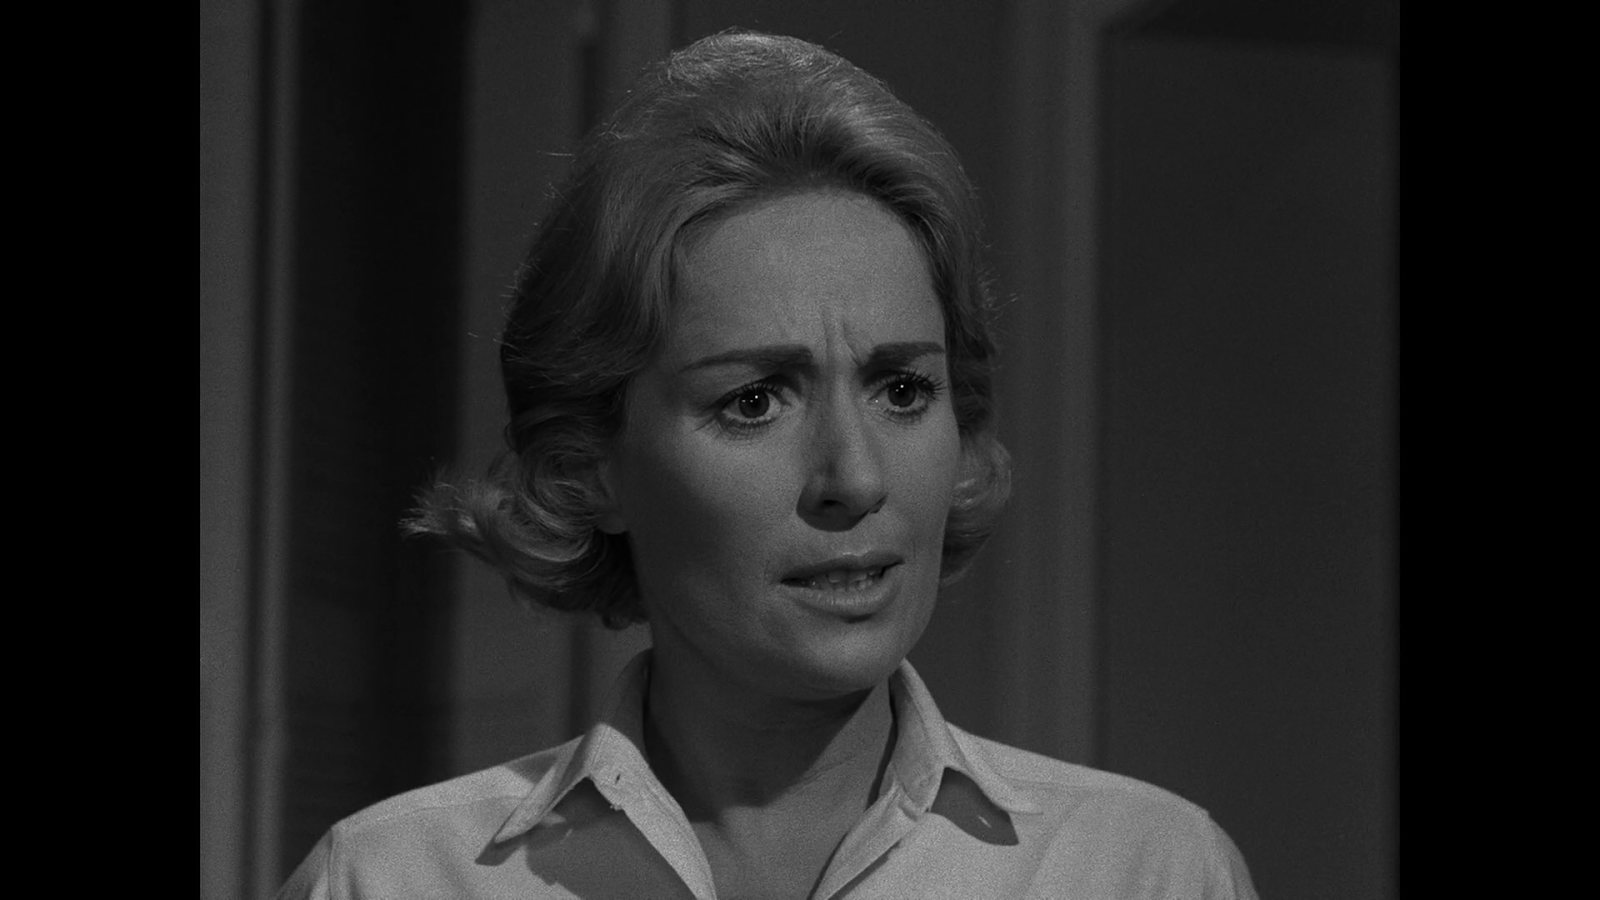 Mary La Roche (Annabelle Streator) previously entered The Twilight Zone as Mary...